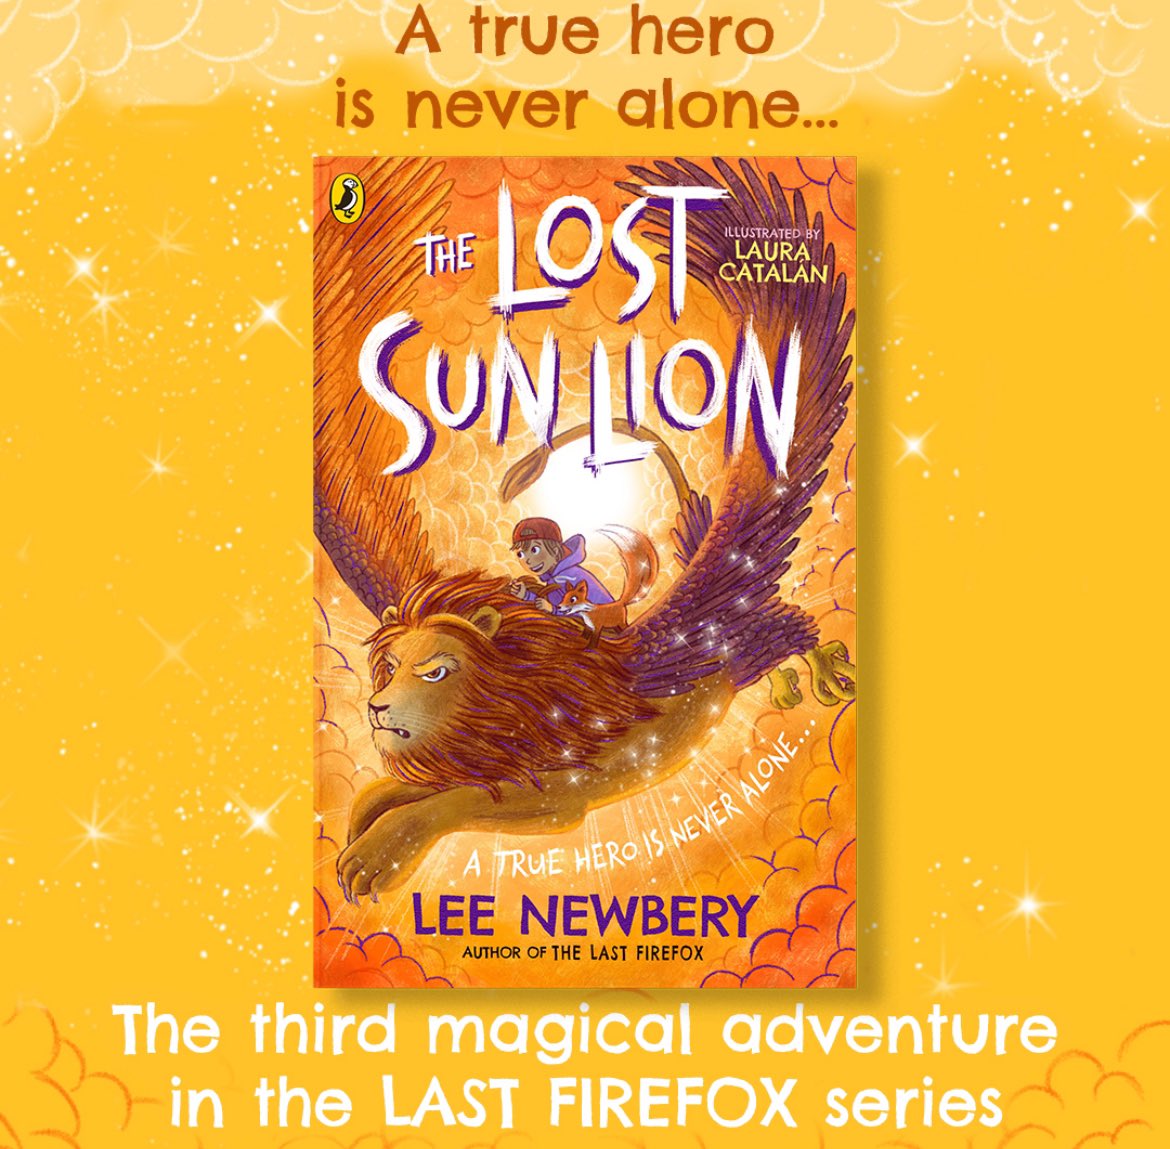 *ANNOUNCEMENT* So here’s the world’s worst kept secret… my third book, the final instalment in the Firefox series, is out on May 16th! It’s called THE LOST SUNLION, and the cover is glorious. Full of more magic, more danger, more hilarity, more blossoming queerness! ❤️